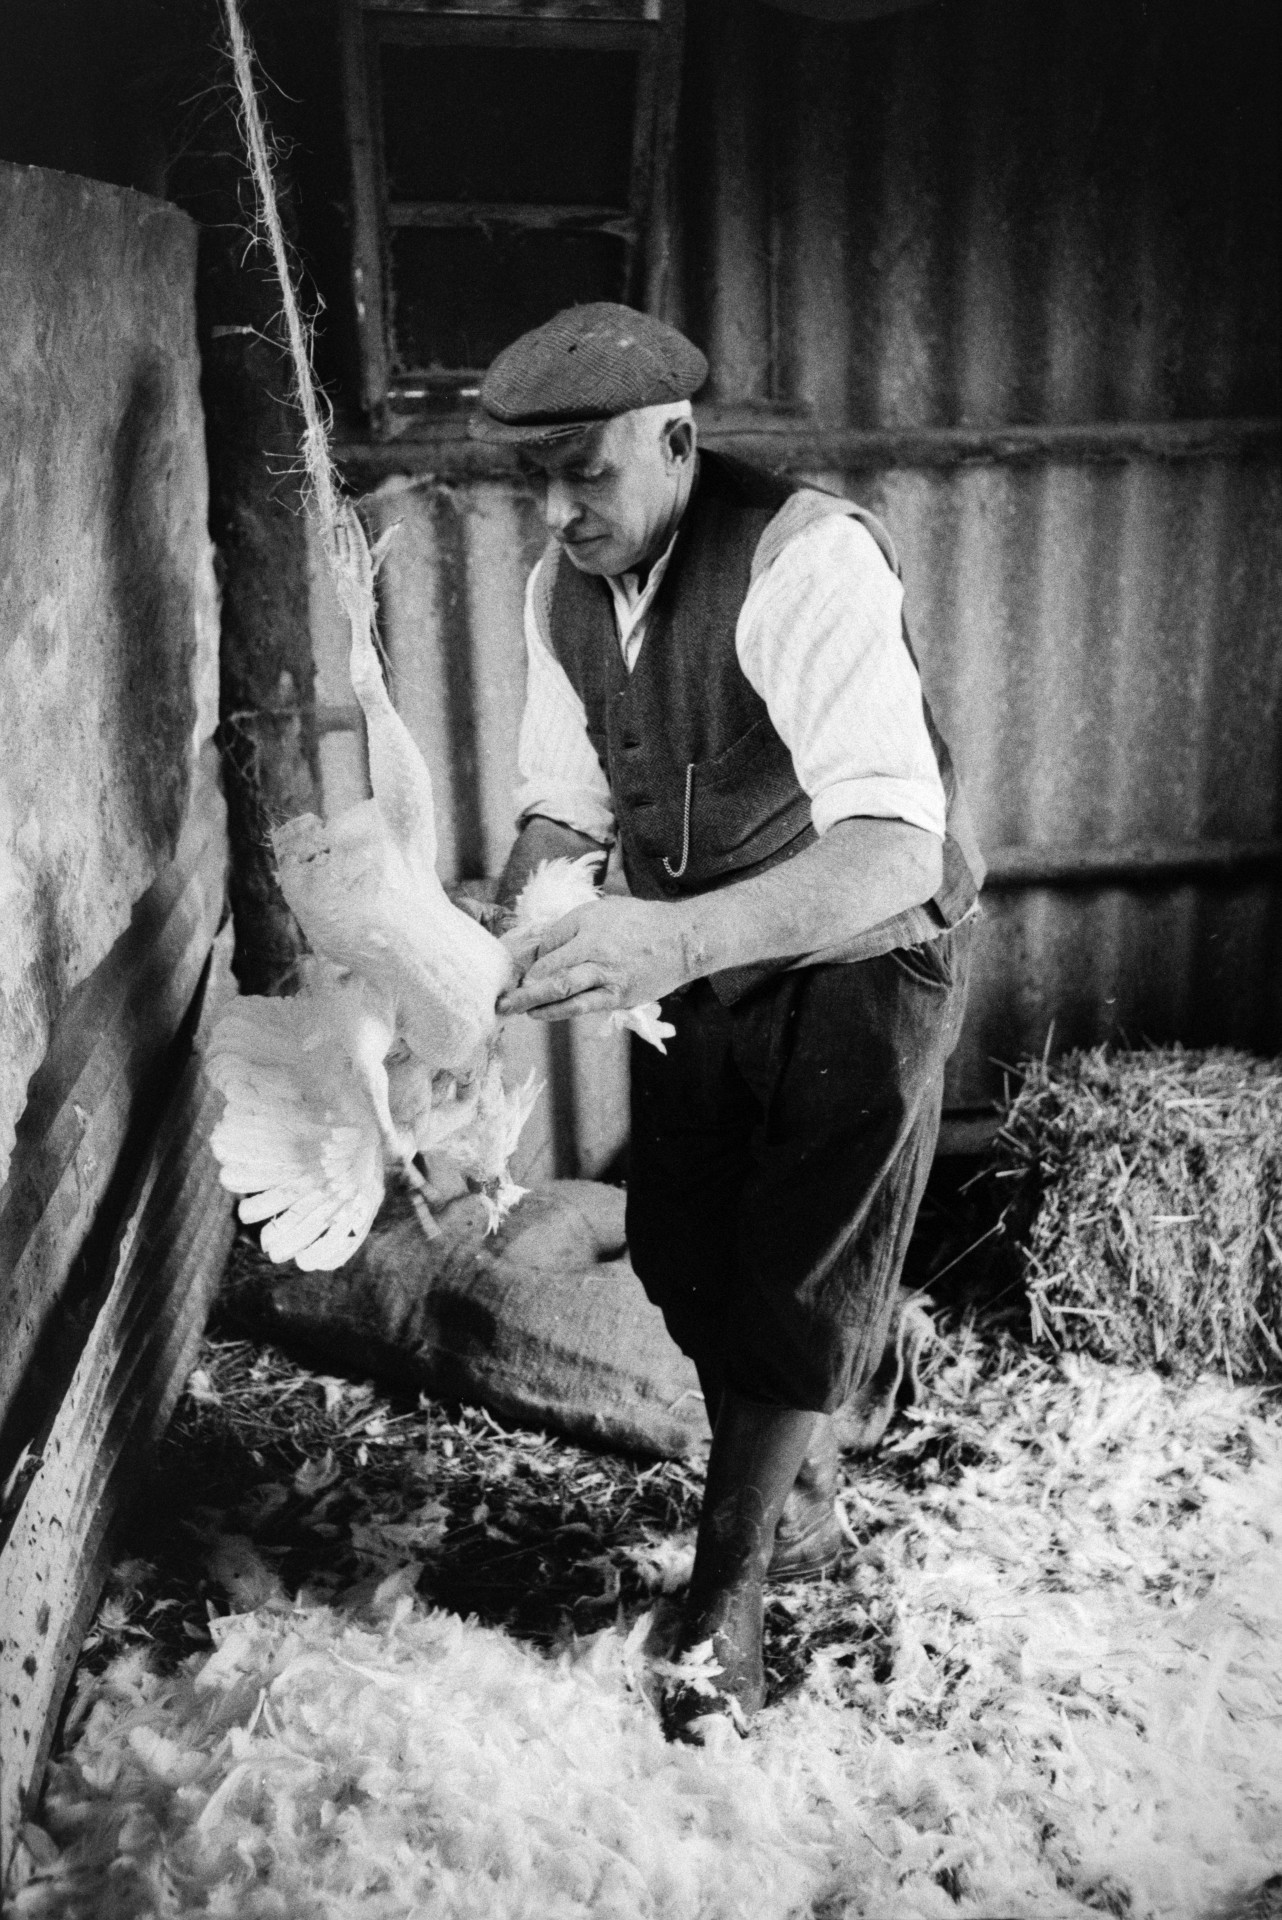 Tom Hooper plucking chickens for Christmas in a corrugated iron barn at Mill Road Farm, Beaford. The farm was also known as Jeffrys.